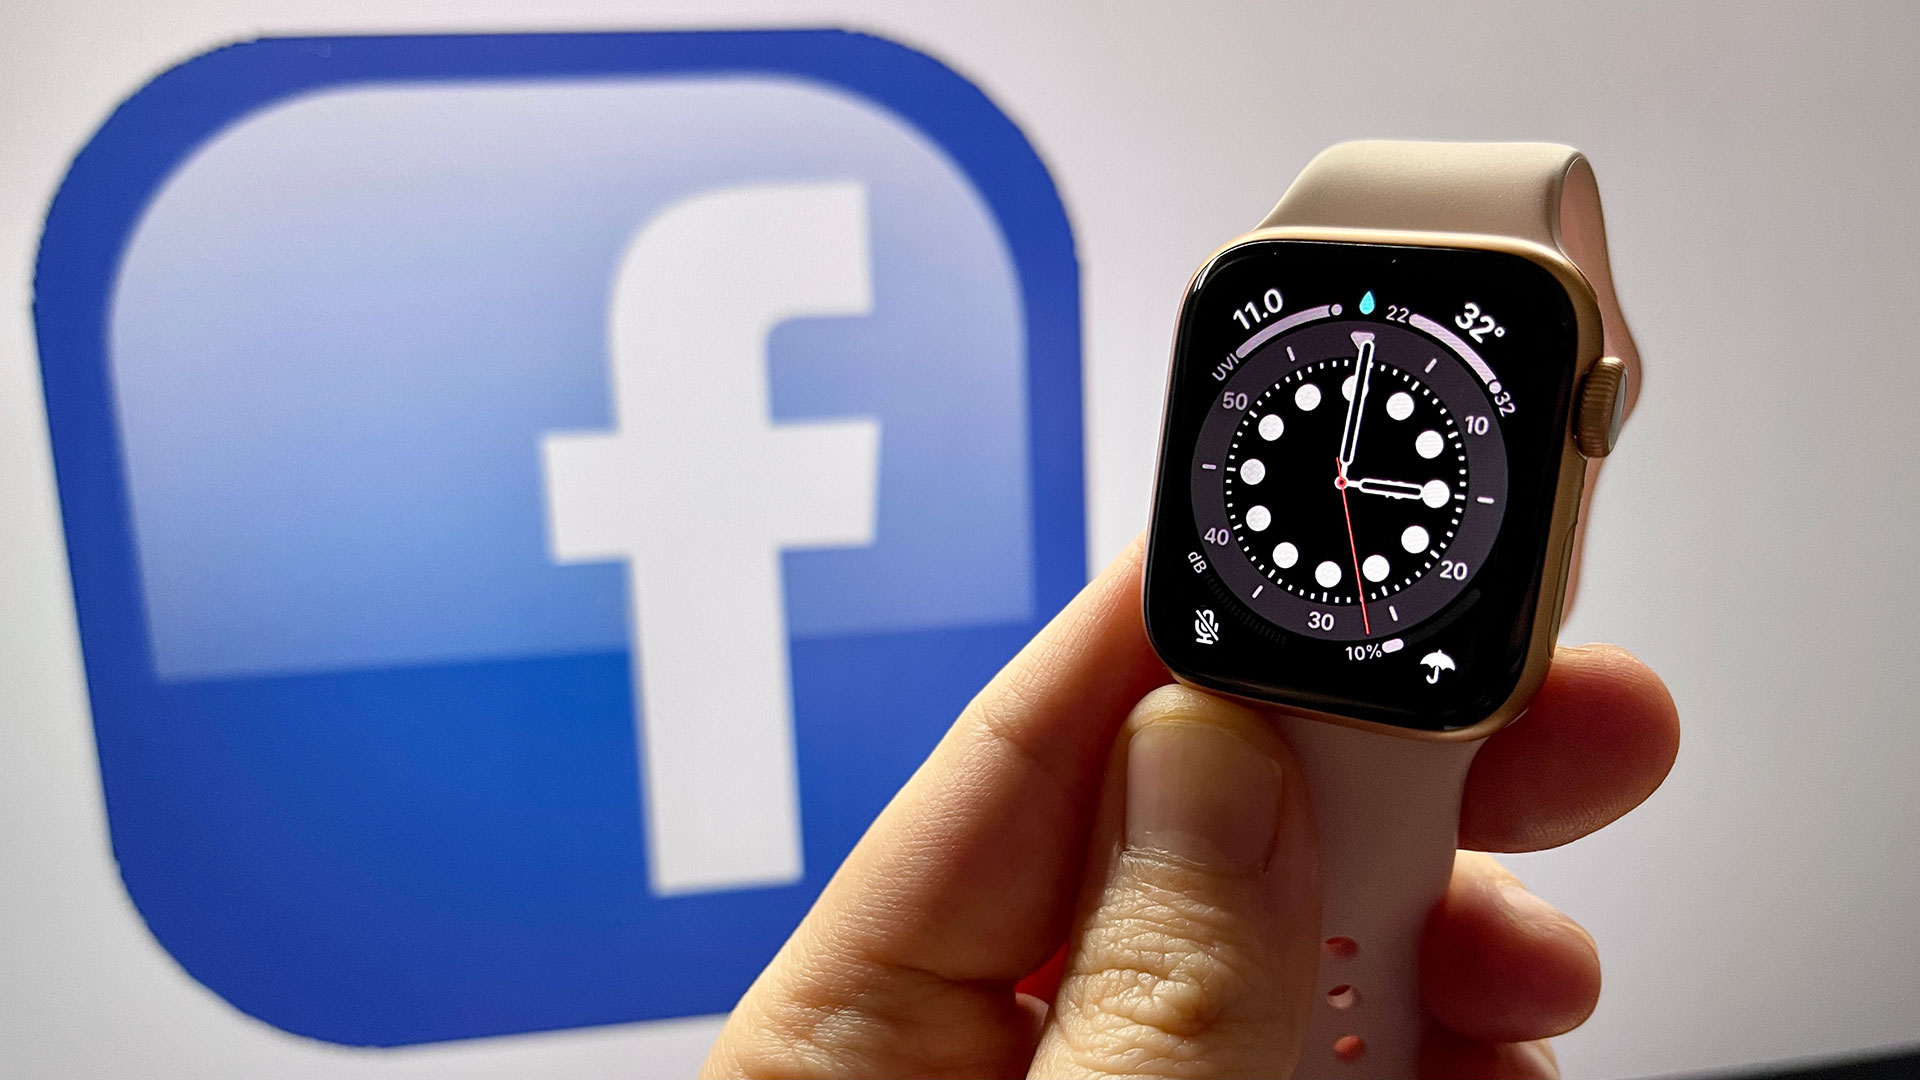 Report: Facebook plotting Apple Watch competitor for as soon as 2022